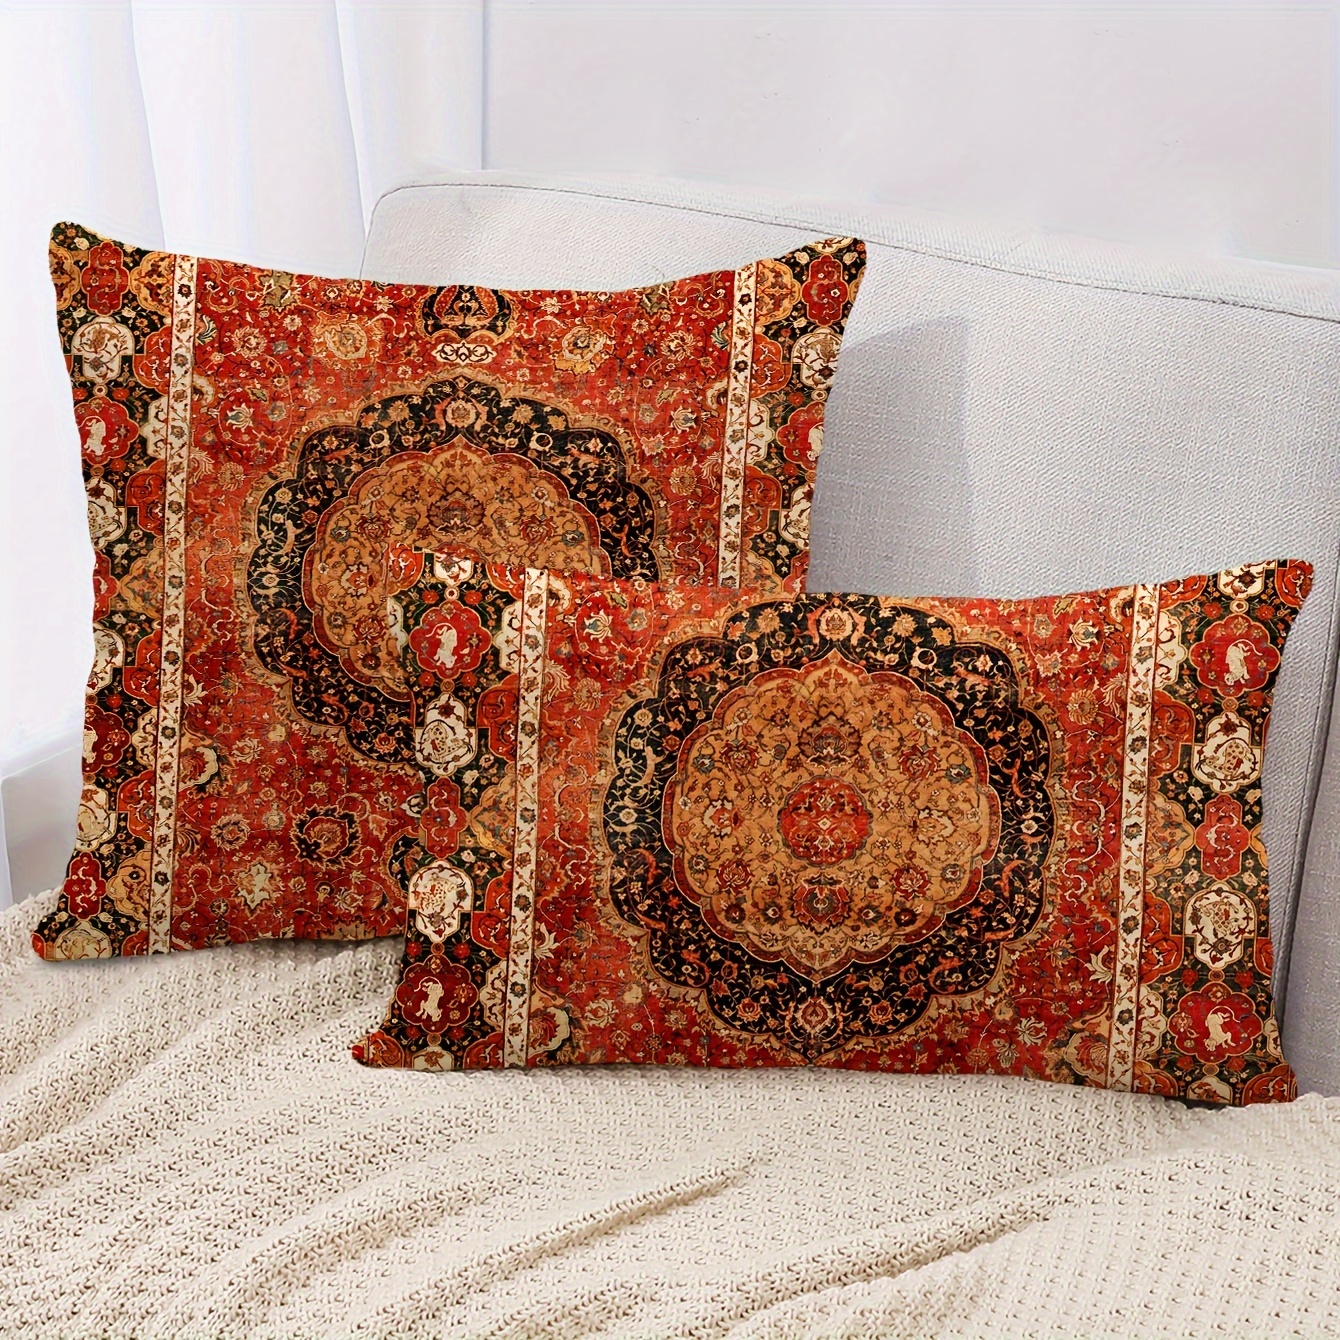 

2-pack 17x17 Inches Bohemian Throw Pillow Covers, Decorative Sofa Cushion Covers, 100% Cotton Blend, Vintage Boho Style, Cozy Home Living Room Decor, Pillow Inserts Not Included